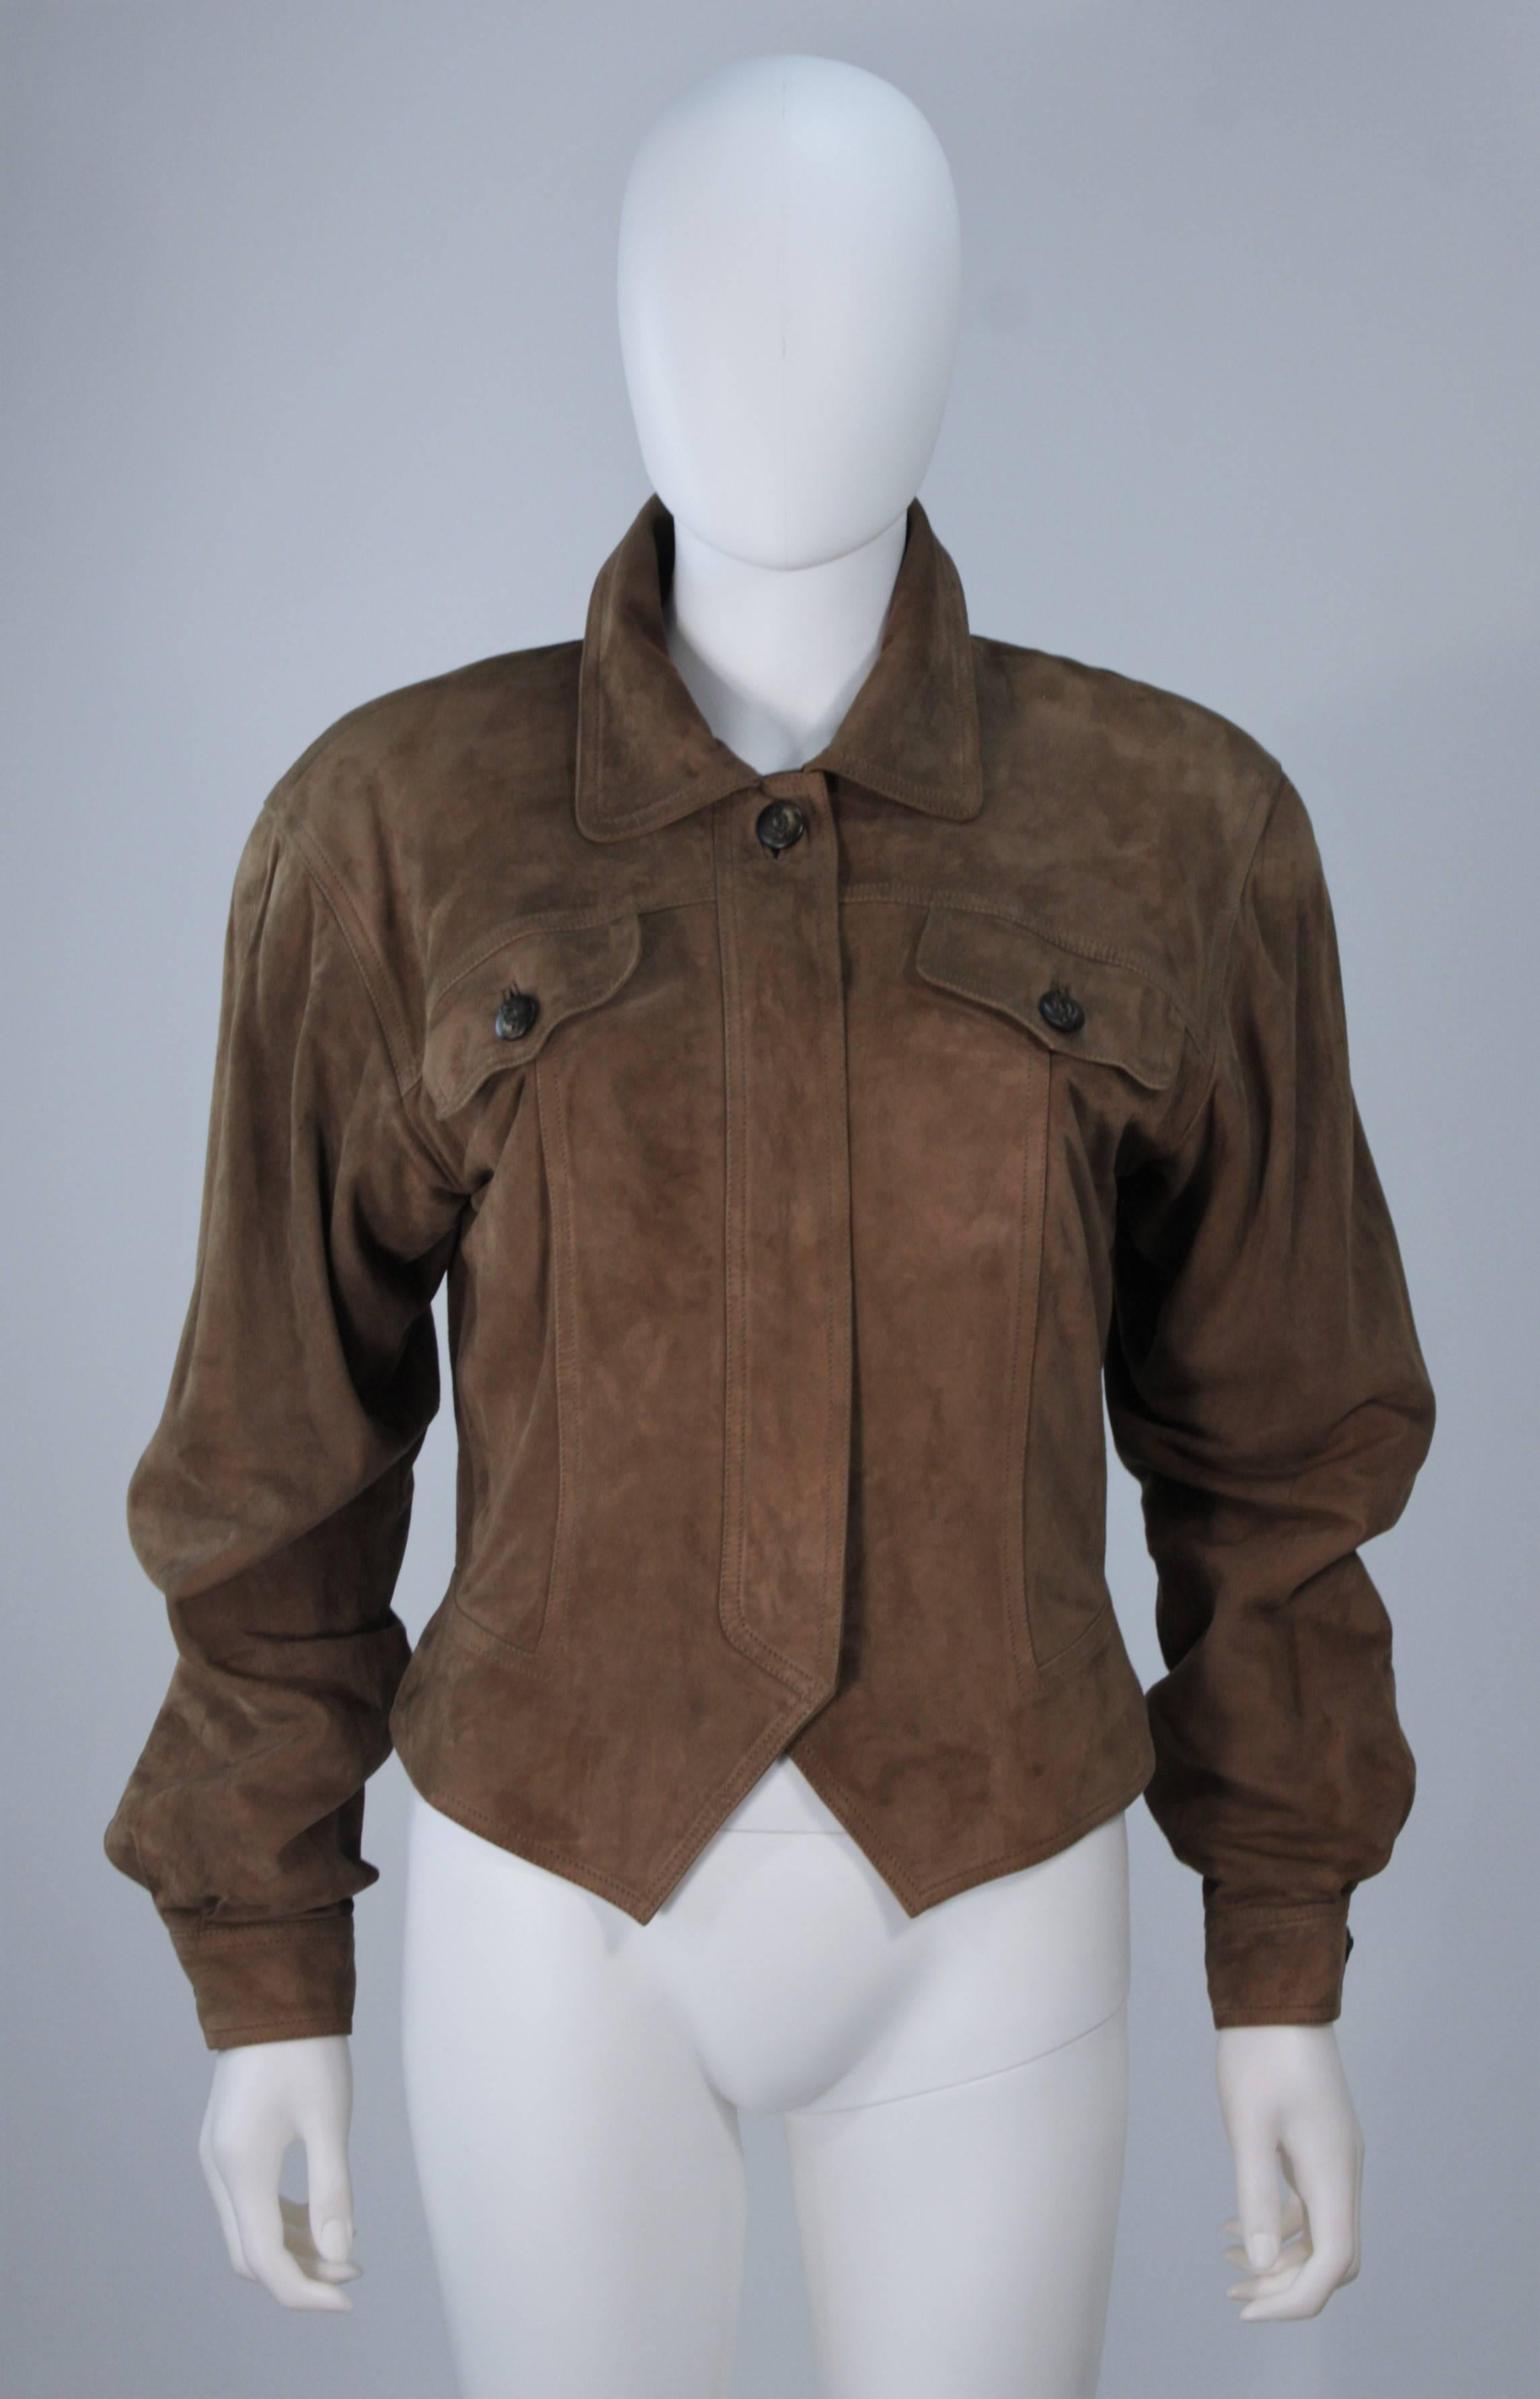  This Gucci jacket is composed of a supple khaki brown hue suede. Features center front button closures, and shoulder pads. In excellent vintage condition.

 **Please cross-reference measurements for personal accuracy. 

Measures